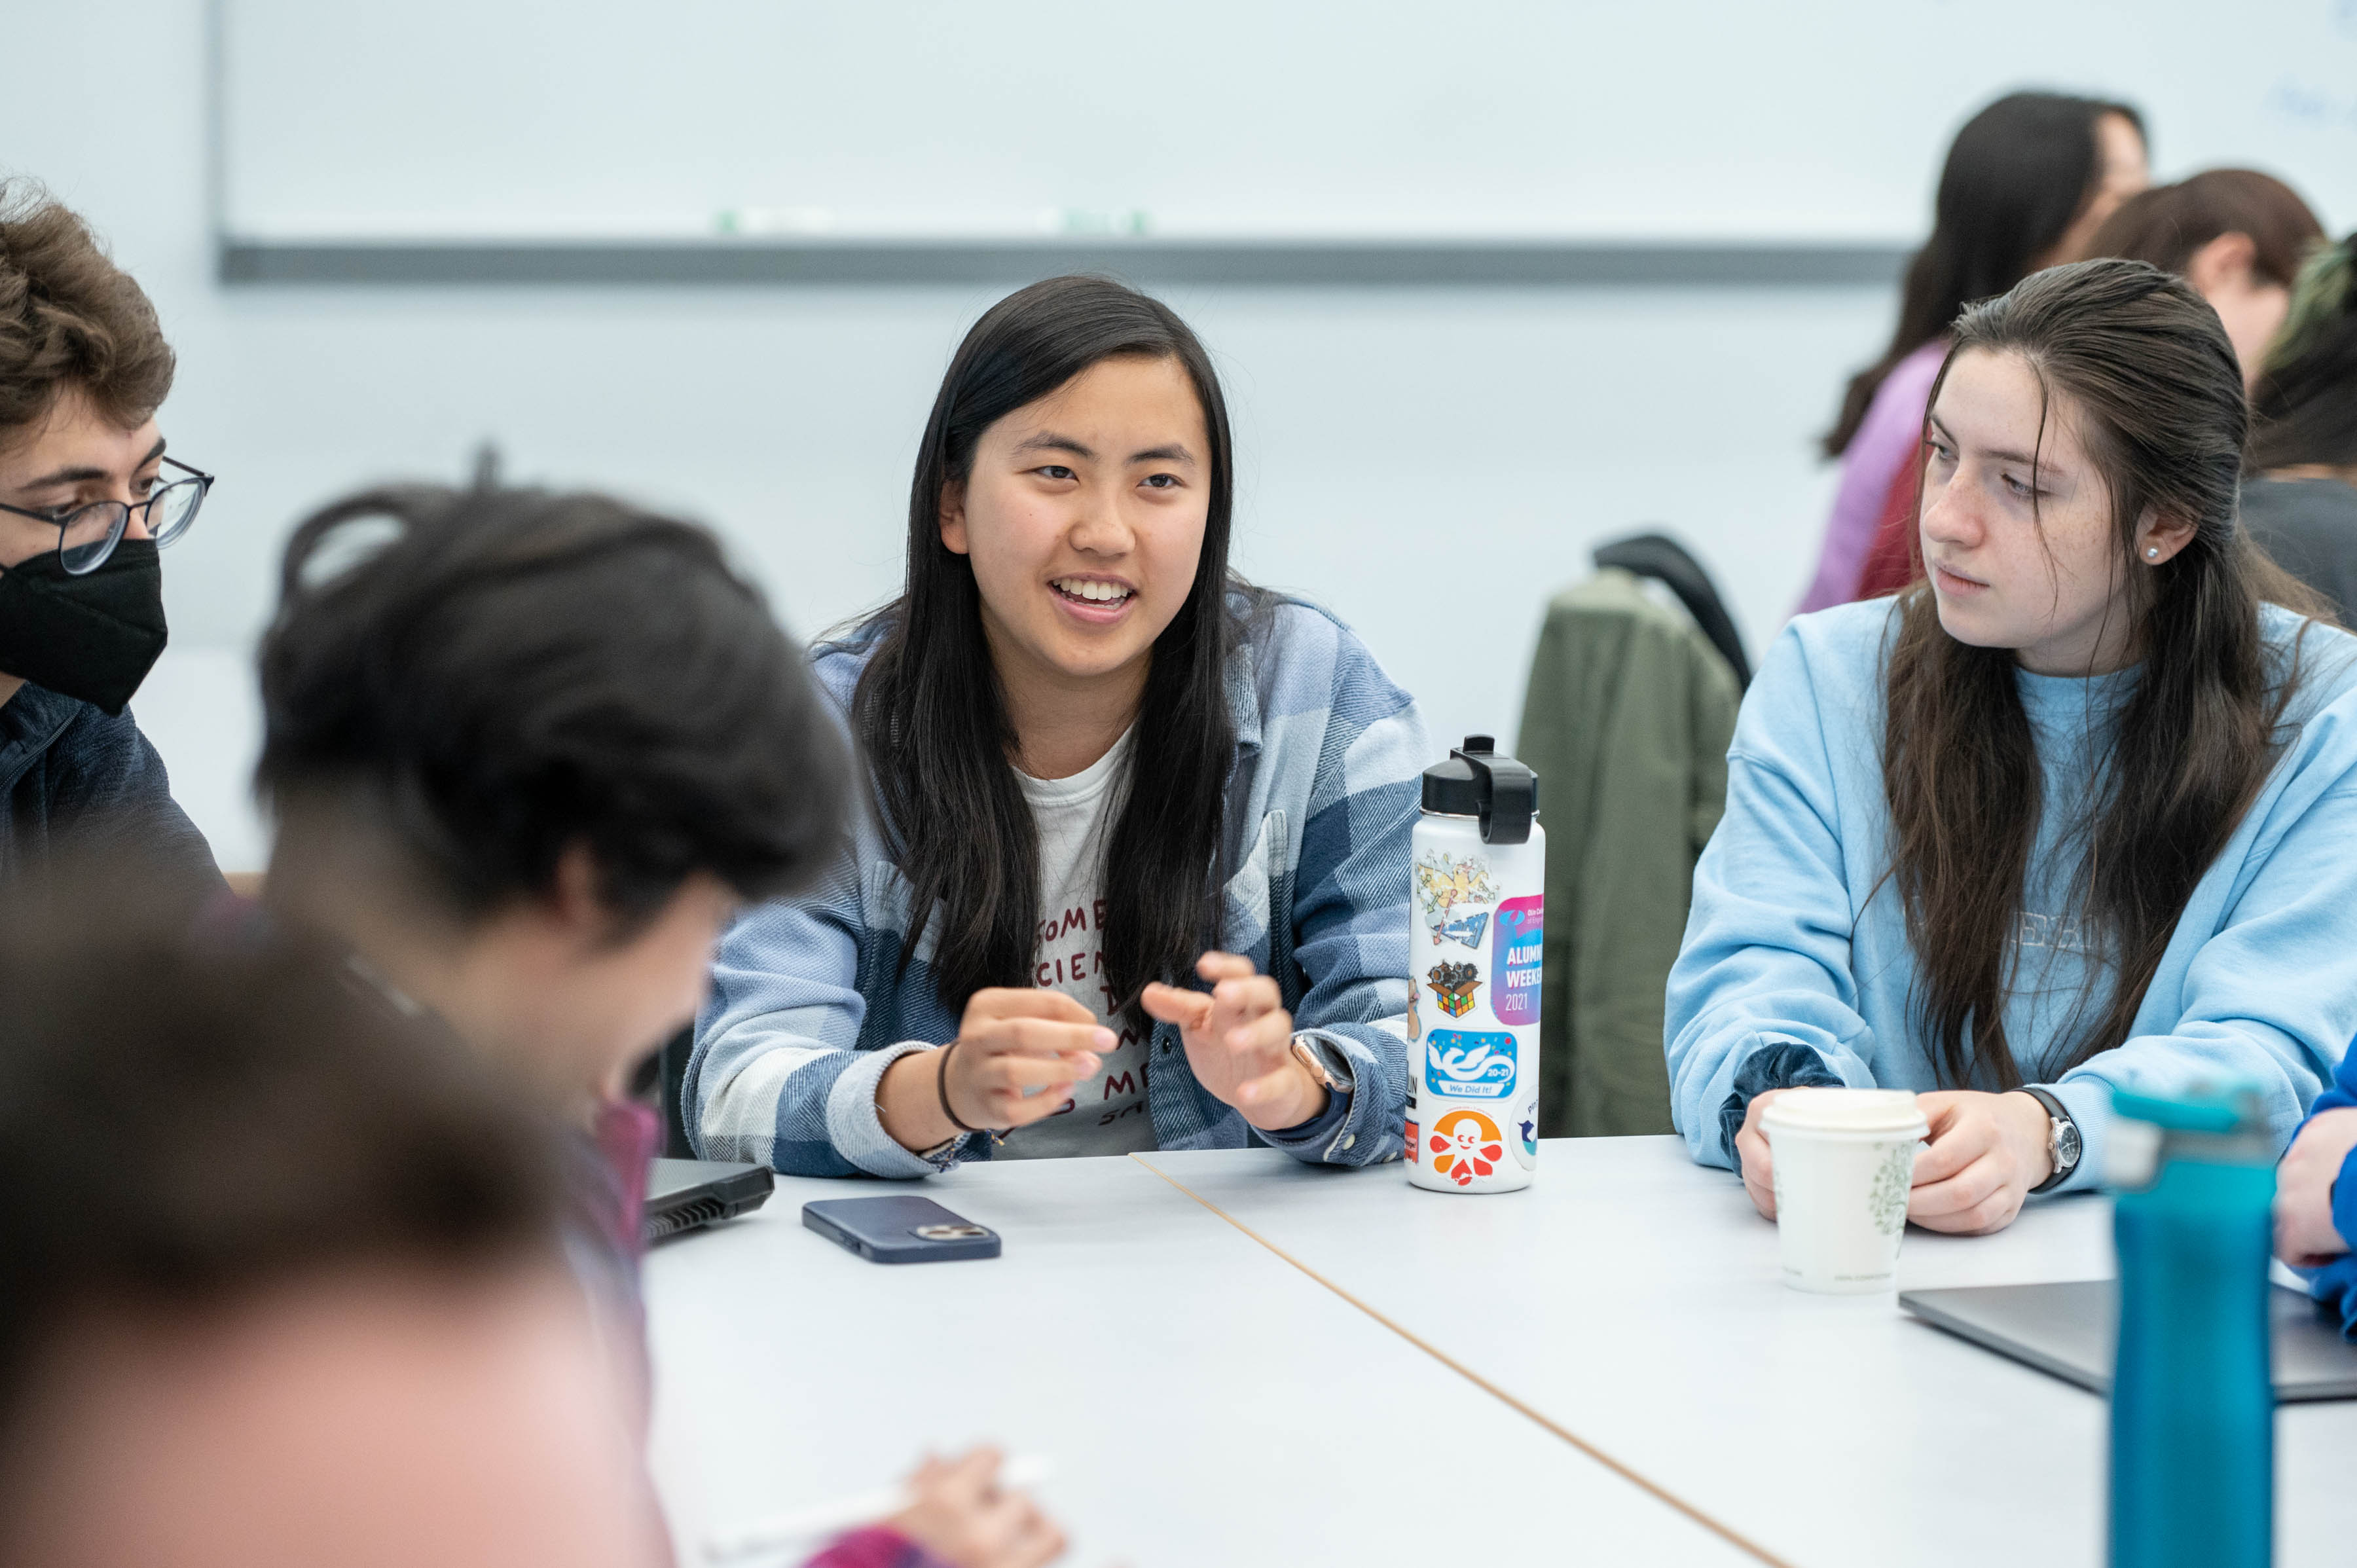 Maya Lum'23, Tigey Jewell- Alibhai'23, Allison Li'24, Cara Mulrooney'24 pictured left to right respectively working on Engineering in Context group activity.